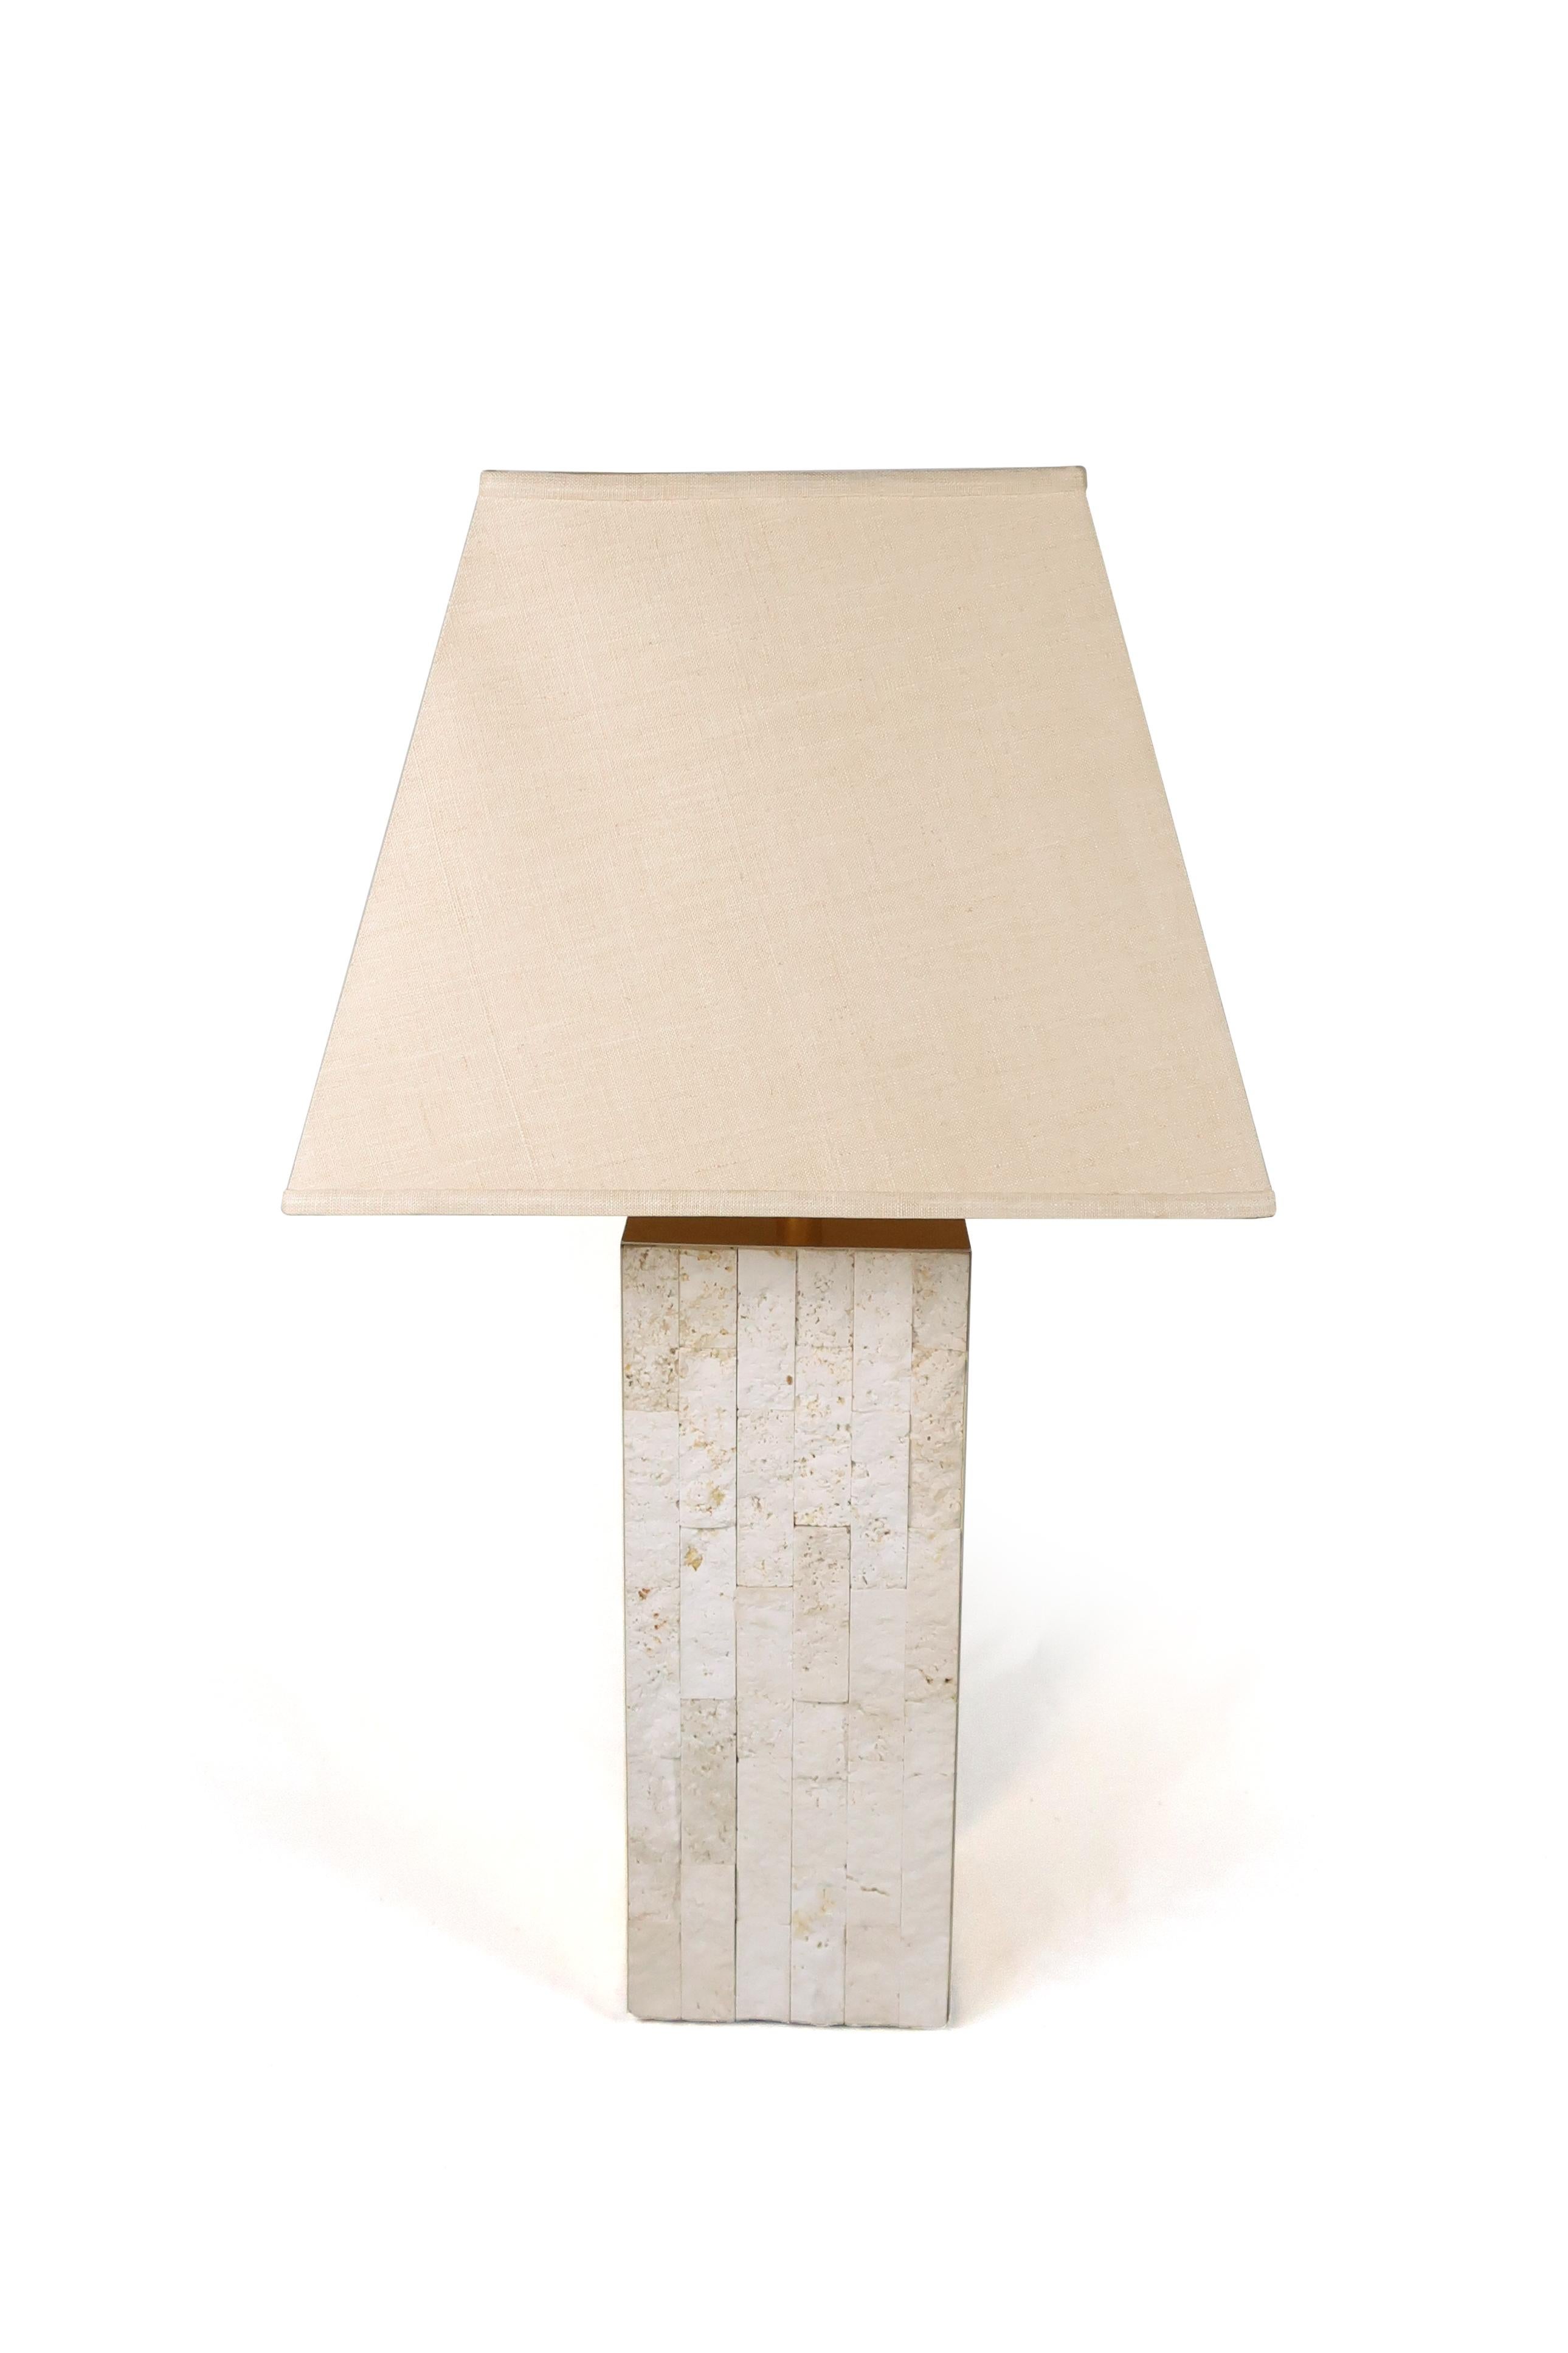 A stunning brass and travertine table lamp. Square base with two sides of stacked pieces of travertine and two sides of brass. A small dent in the top of the brass that can’t be seen when the shade is on. Unmarked and in excellent vintage condition